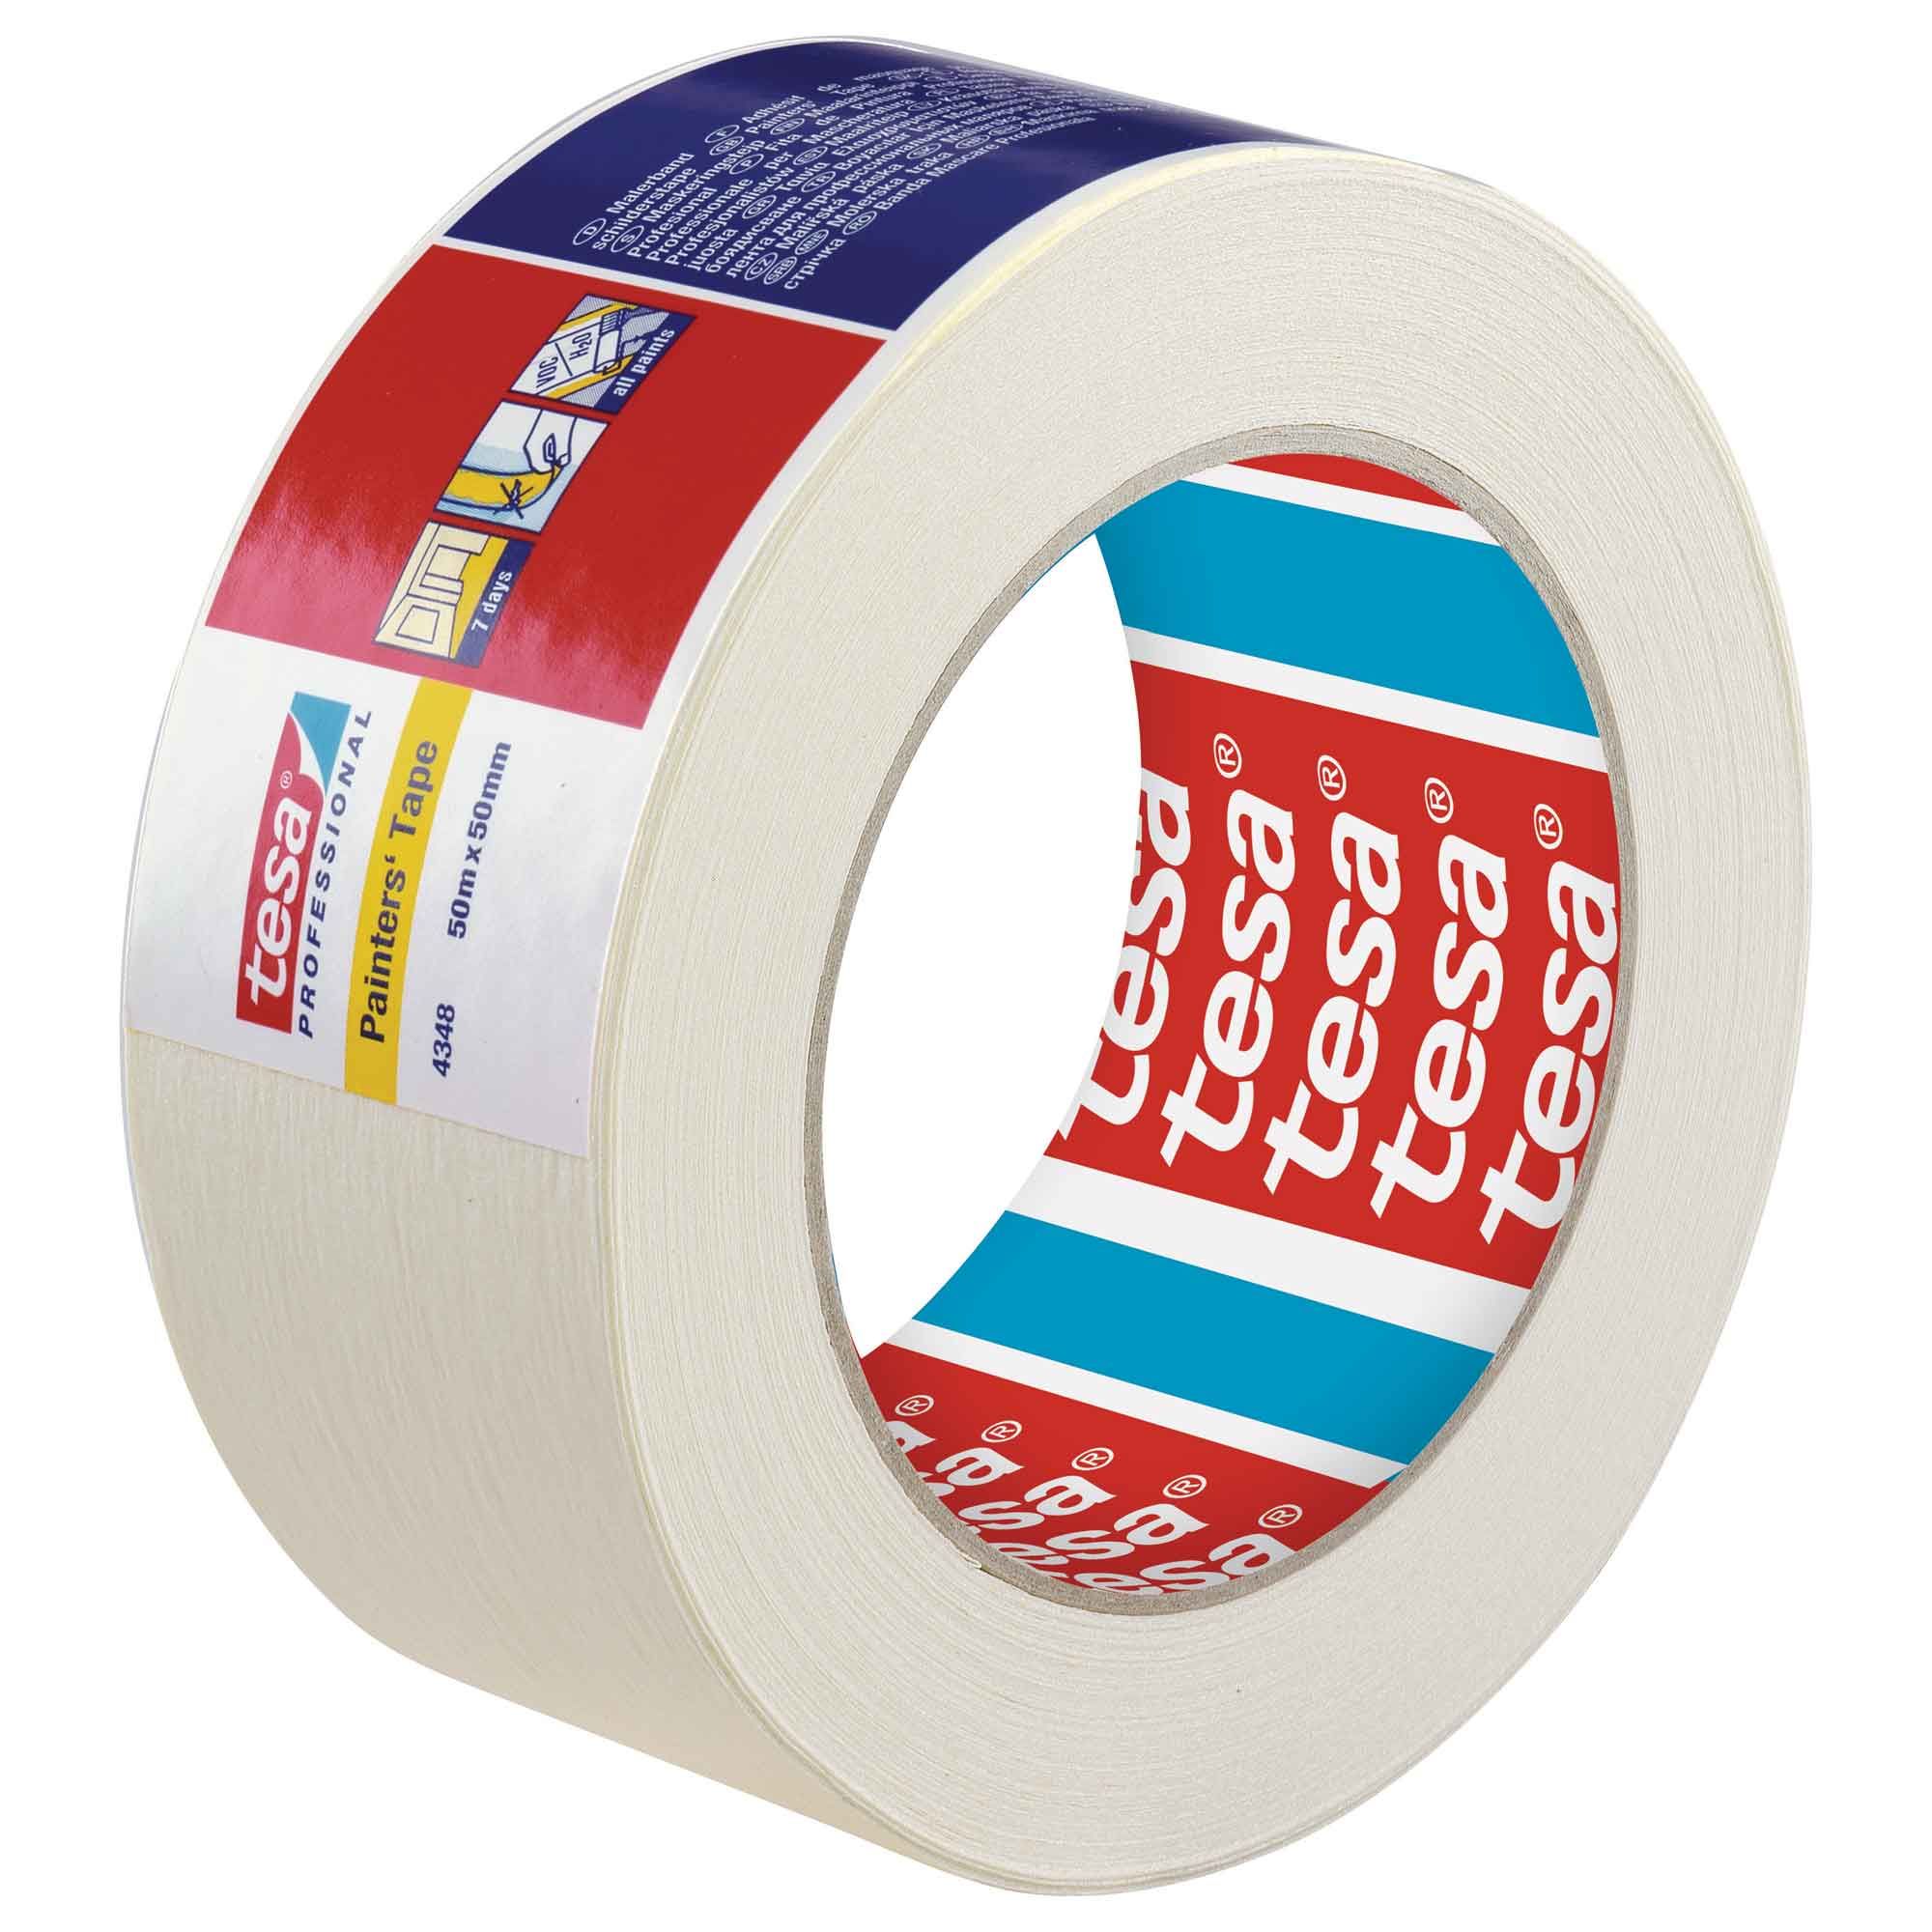 50mm x 50m roll of Masking Tape